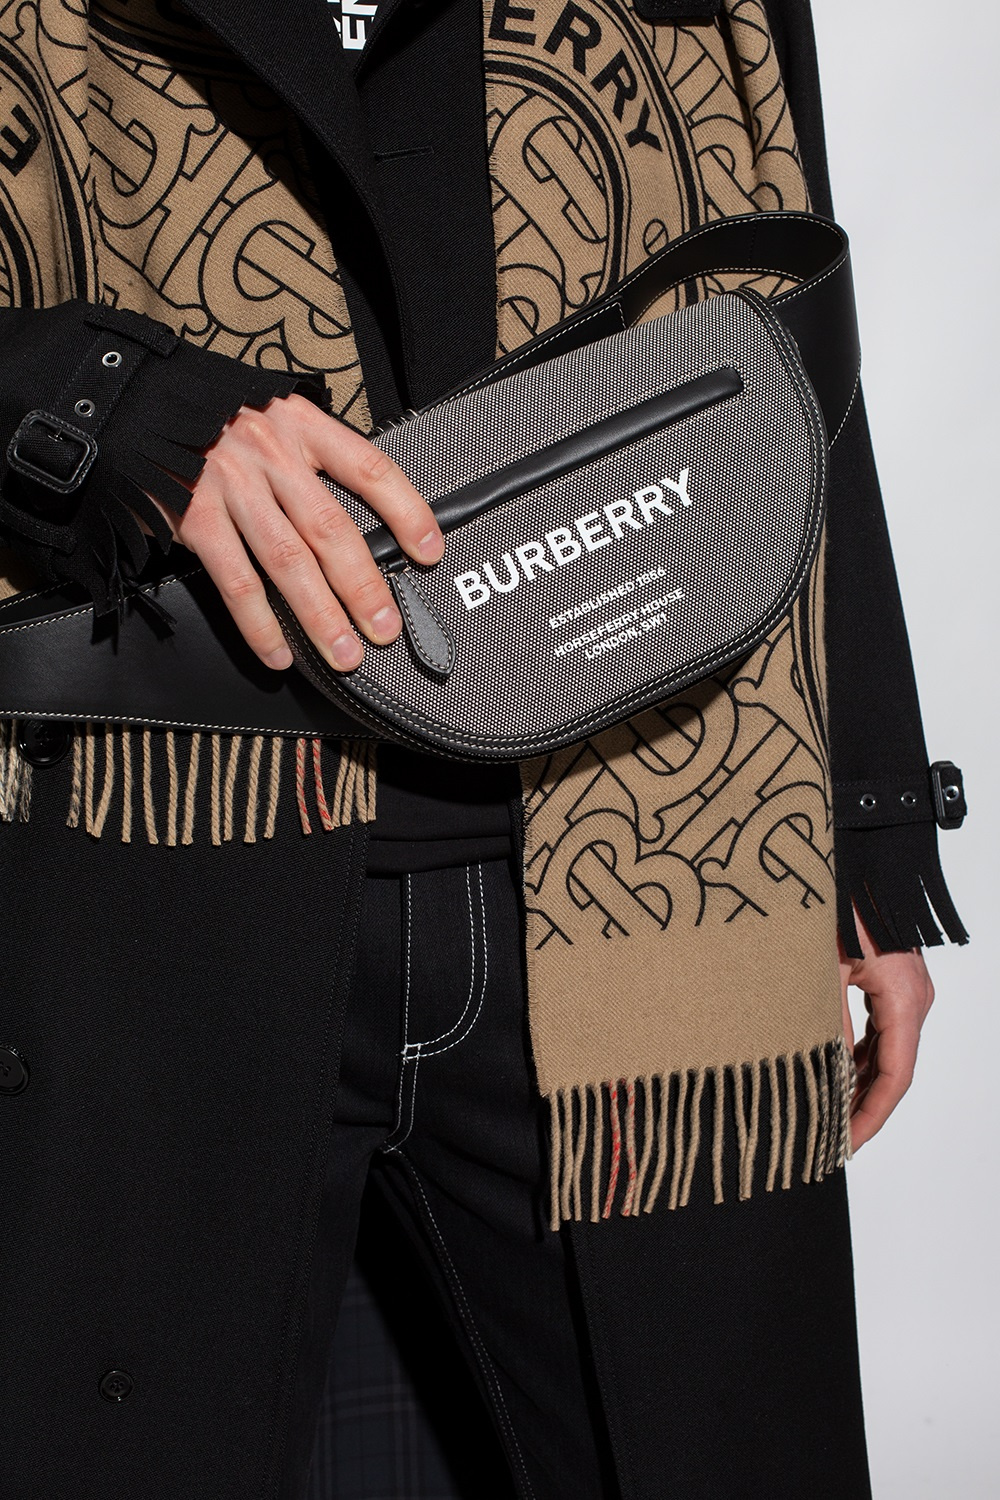 BURBERRY nylon pouch with printed logo  Black  Burberry belt bag 8064929  online on GIGLIOCOM